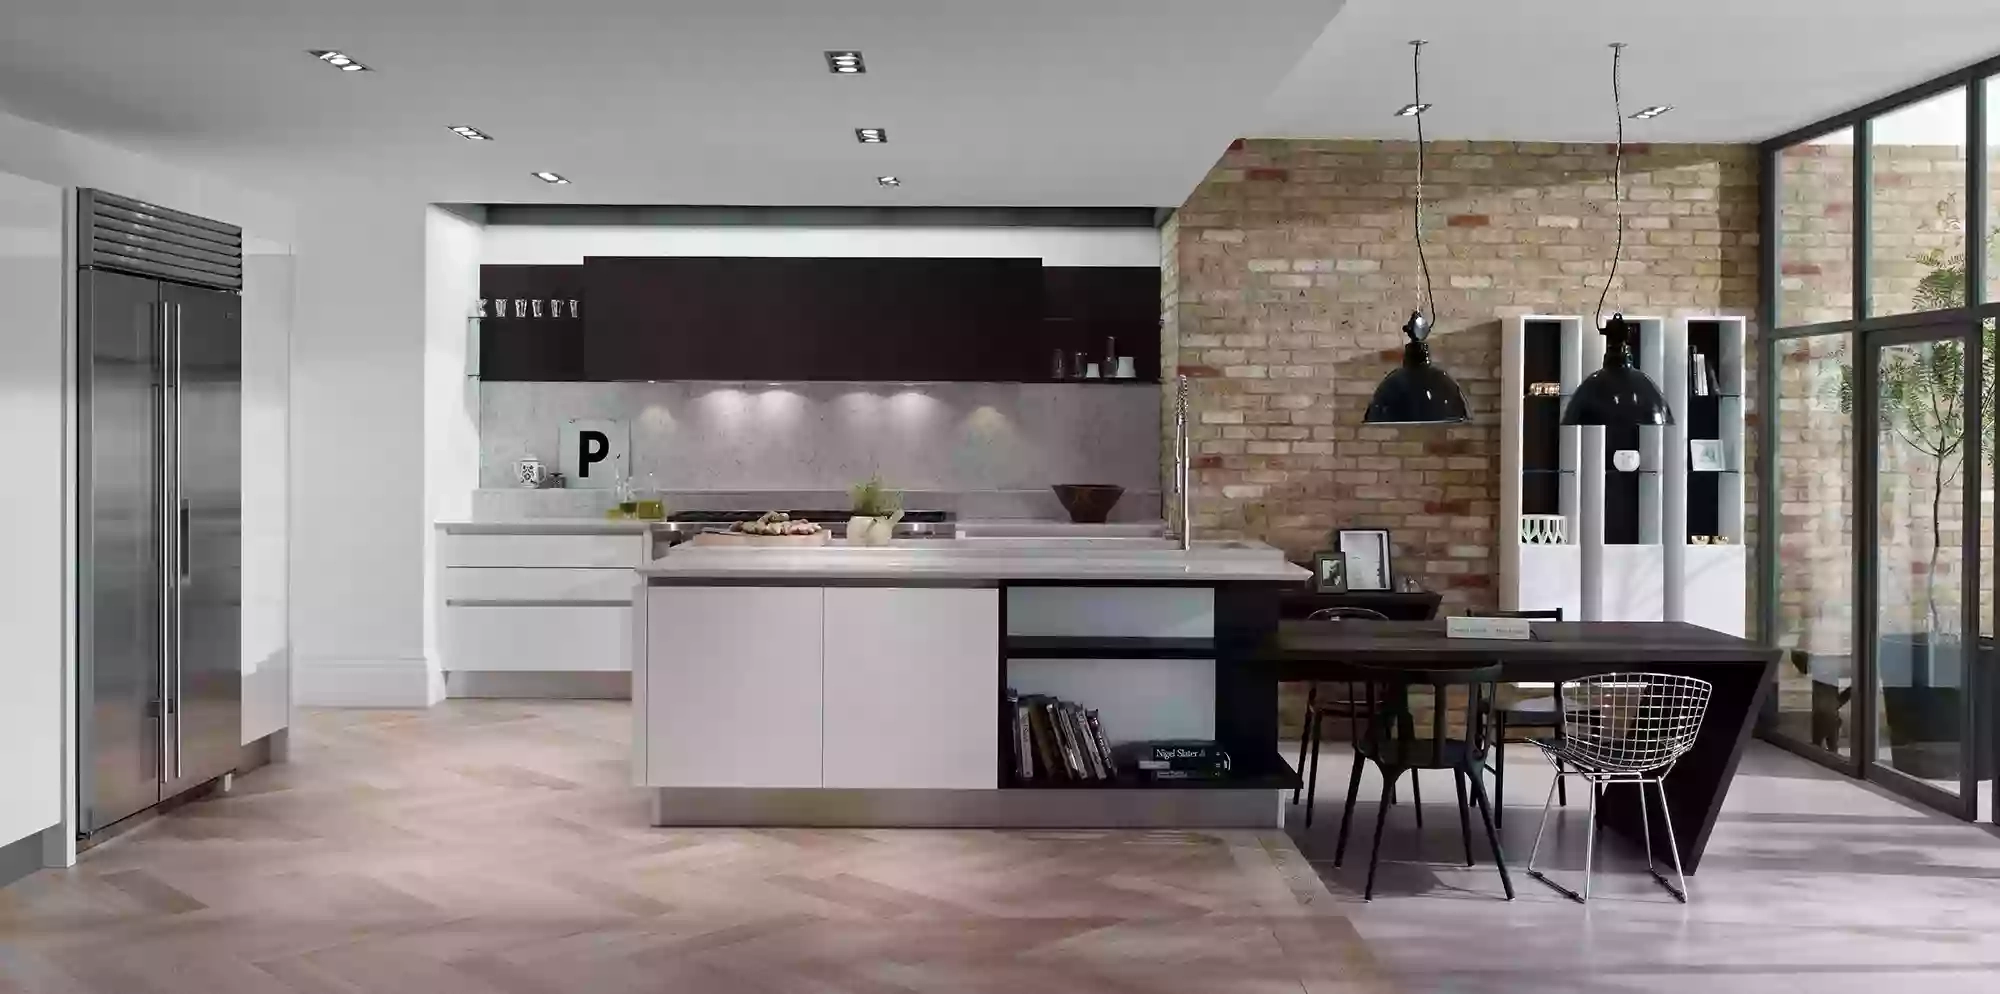 Twenty20 Design - New Kitchens, Bedrooms, Kitchen Makeovers and Home Office